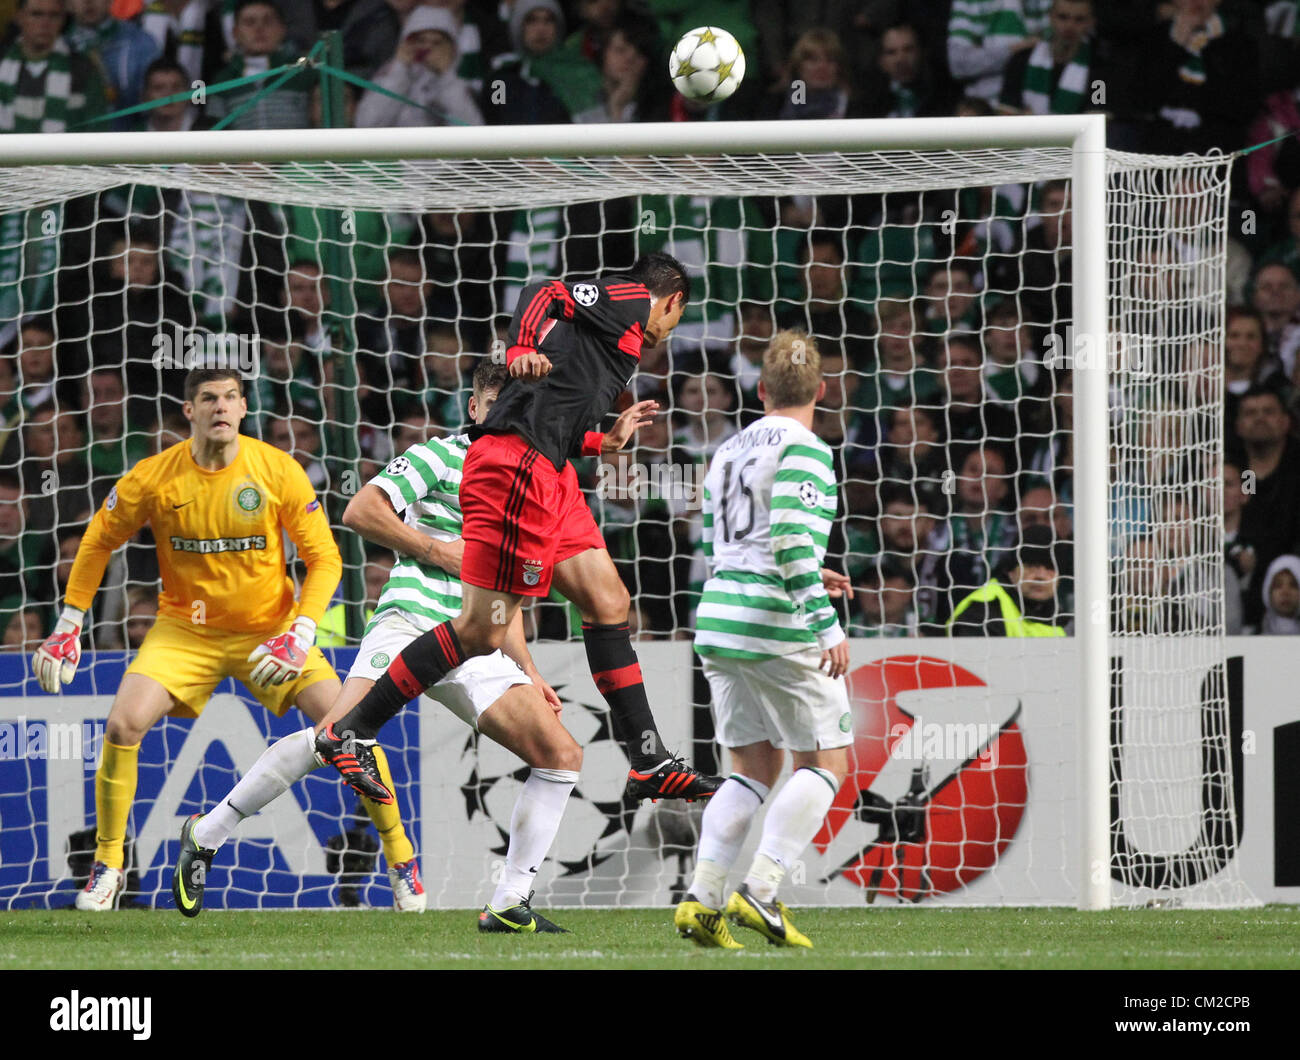 UEFA Champions League Football - Season 2012-13 Group G. Celtic FC v  Benfica FC. Celtic's Miku holds of Benfica's jardel in action during The  UEFA Champions League Group G match between Celtic